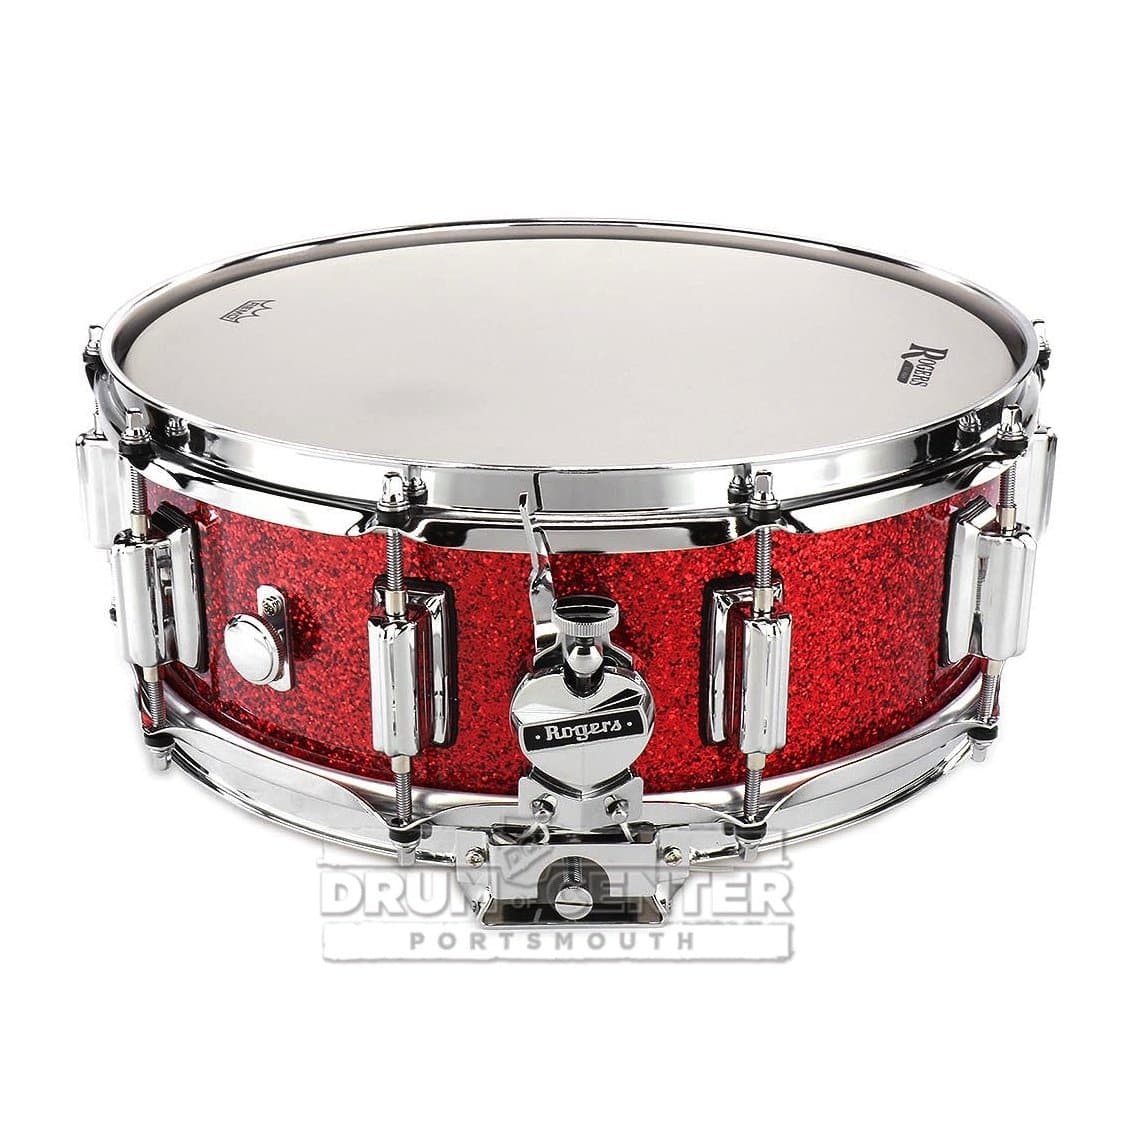 Rogers Dyna-sonic Wood Shell Snare Drum 14x5 Red Sparkle Lacquer